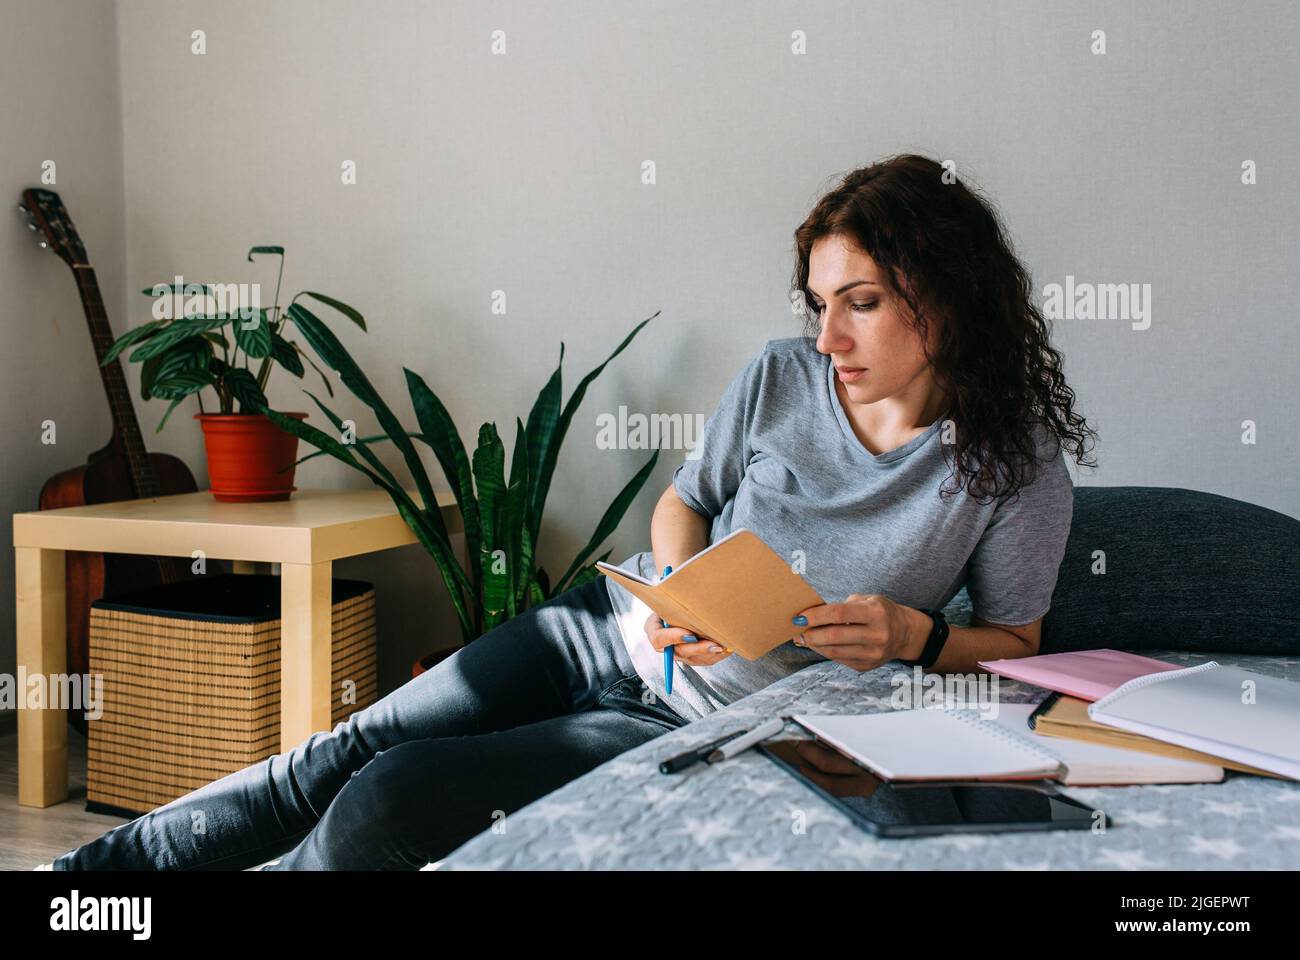 Woman working from home studying. Advanced training, retraining profession. Stock Photo